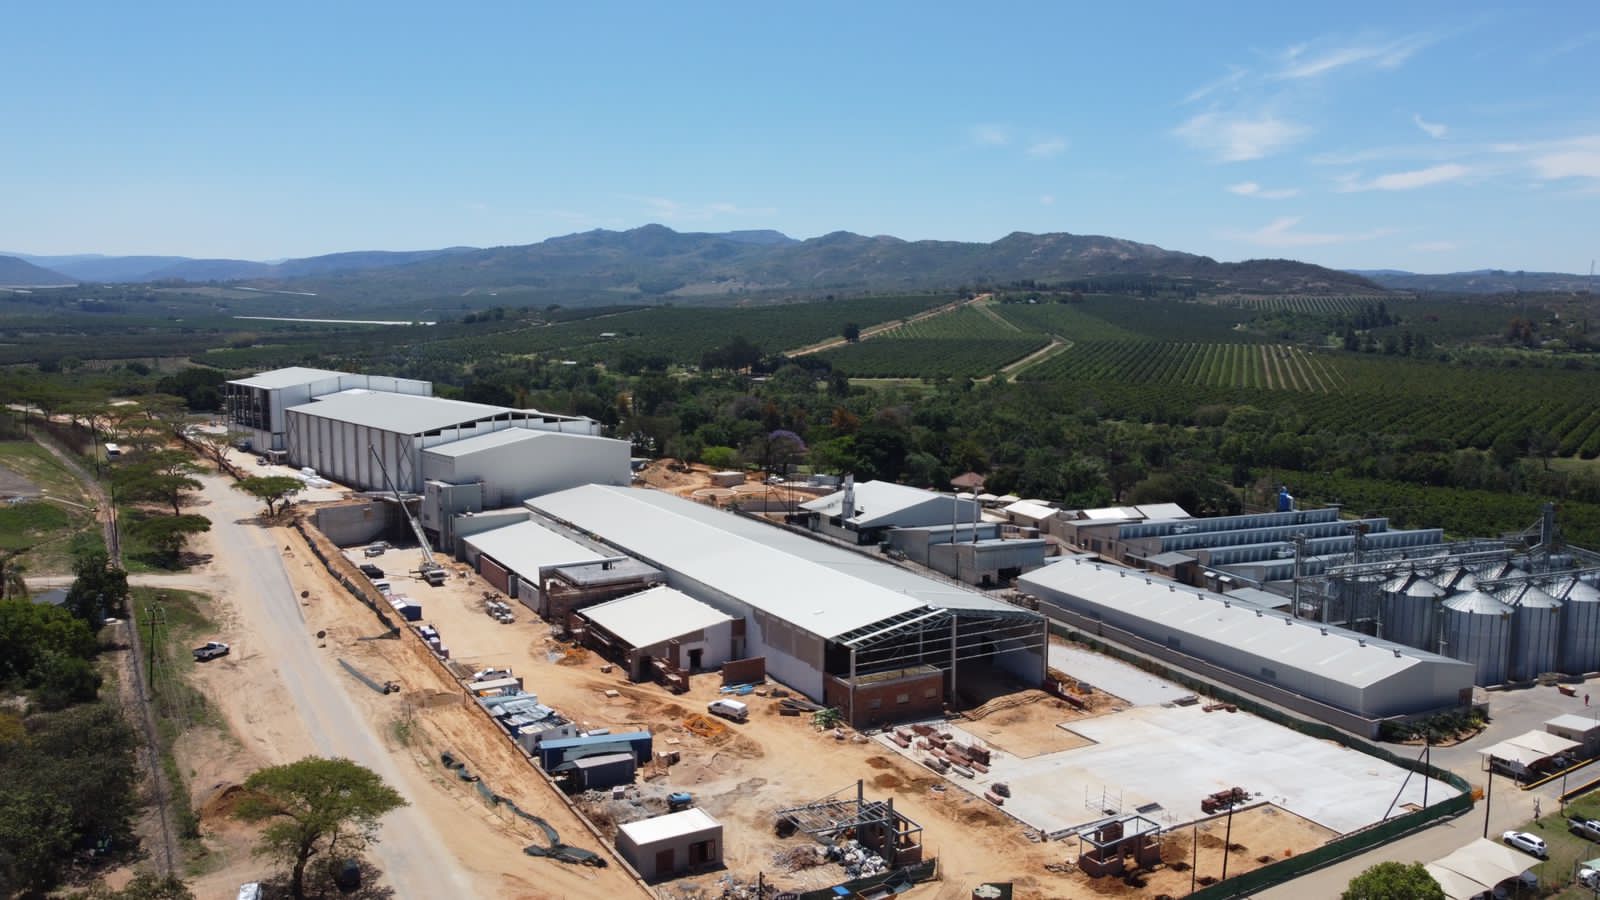 GOLDEN MACADAMIAS, WORLD’S LARGEST MACADAMIA PROCESSOR, ACQUIRES TOMRA Food’S LATEST SORTING TECHNOLOGIES TO FUTURE-PROOF ITS COMPETITIVE ADVANTAGE